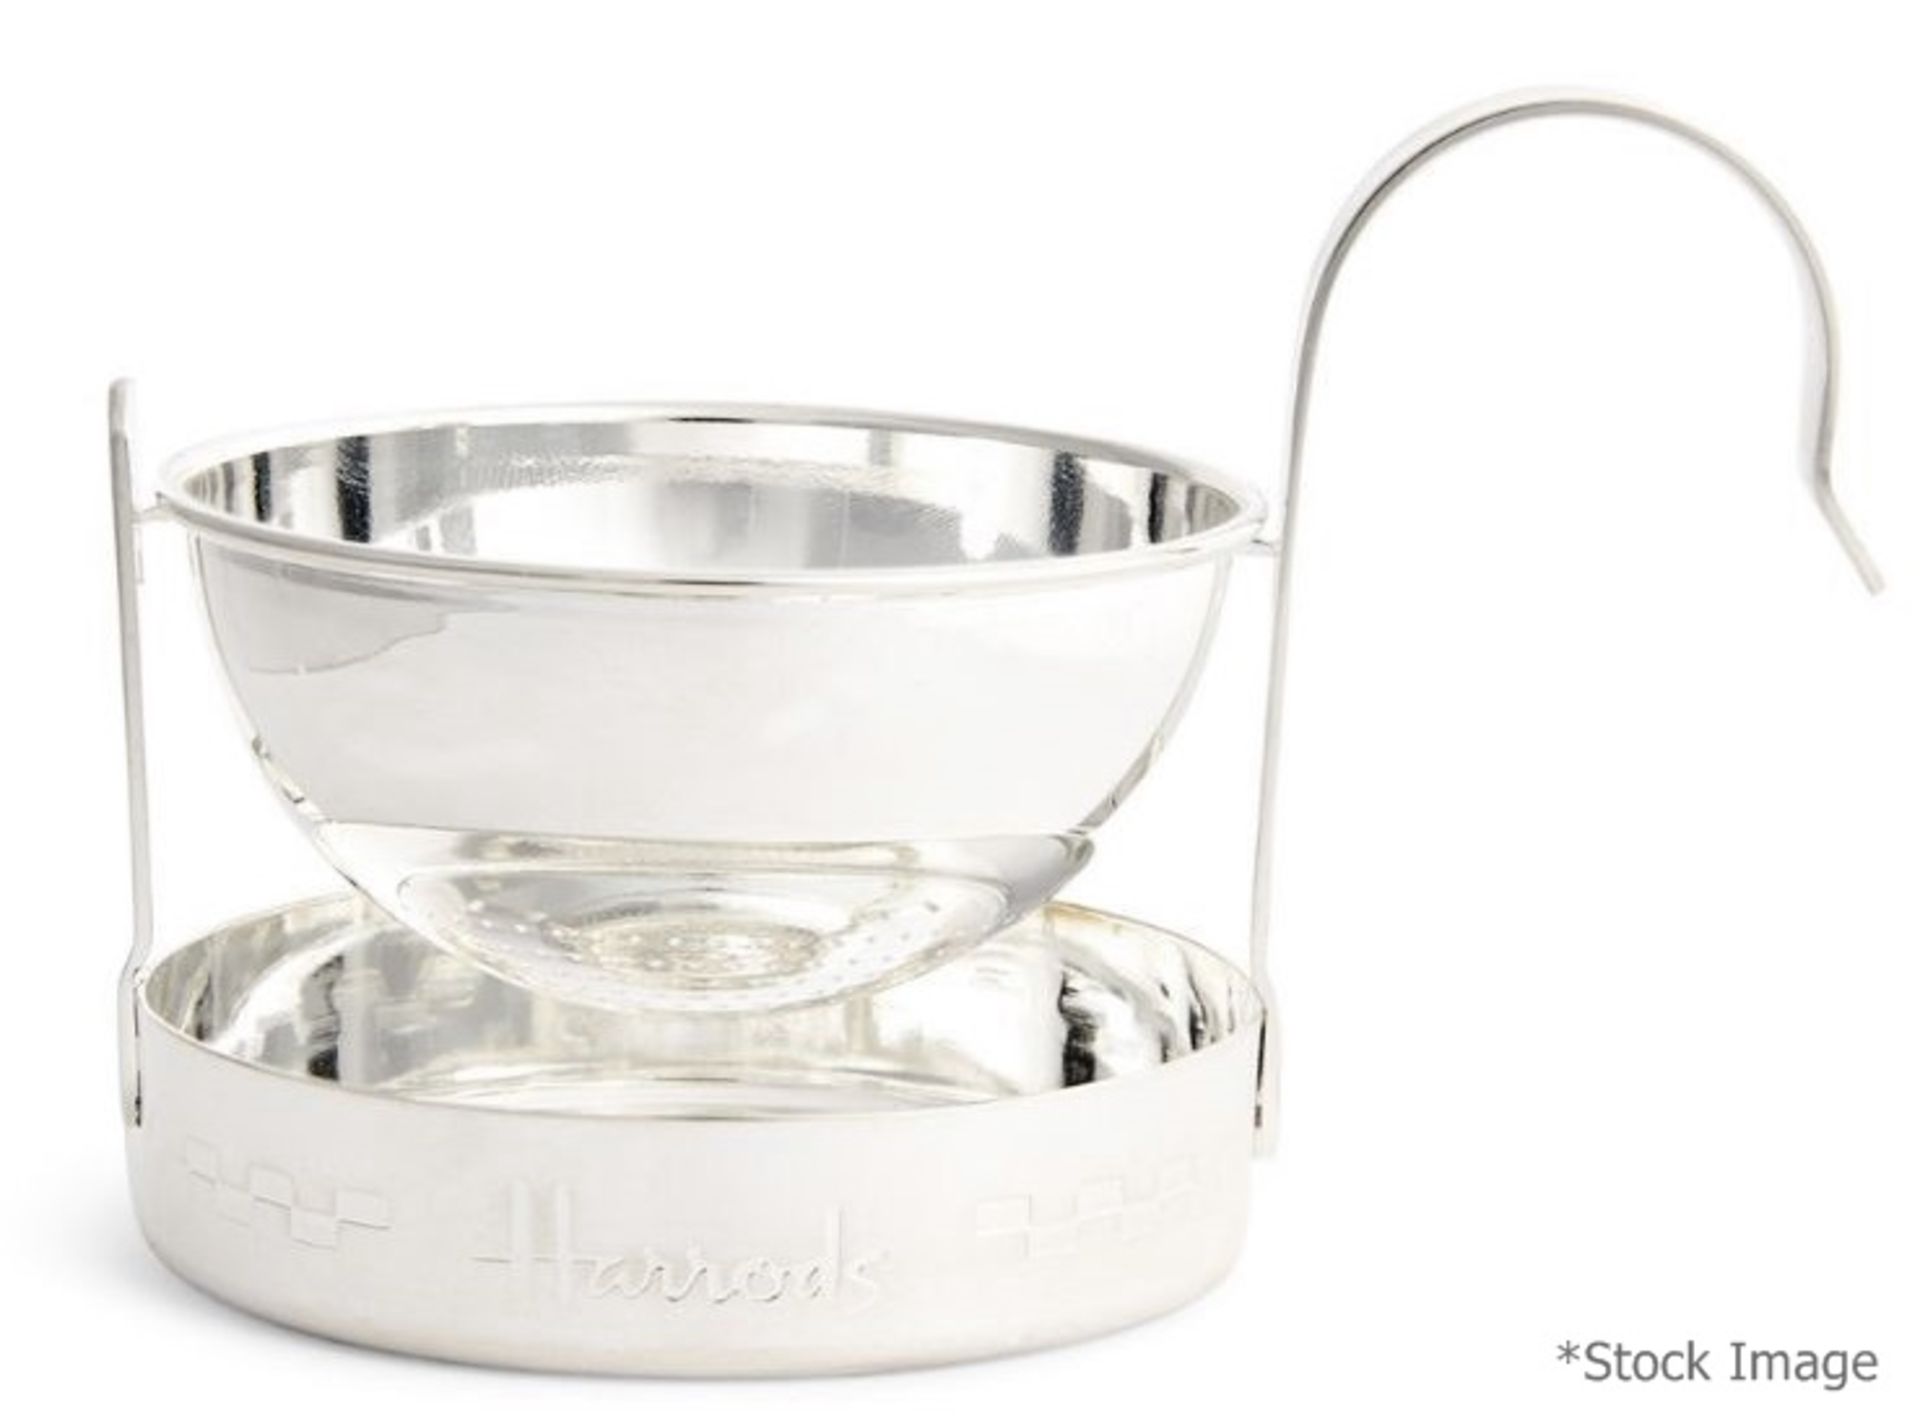 1 x HARRODS Silver-Plated Revolving Strainer - Unused Boxed Stock - Ref: HAS579/FEB22/WH2/C6 - CL987